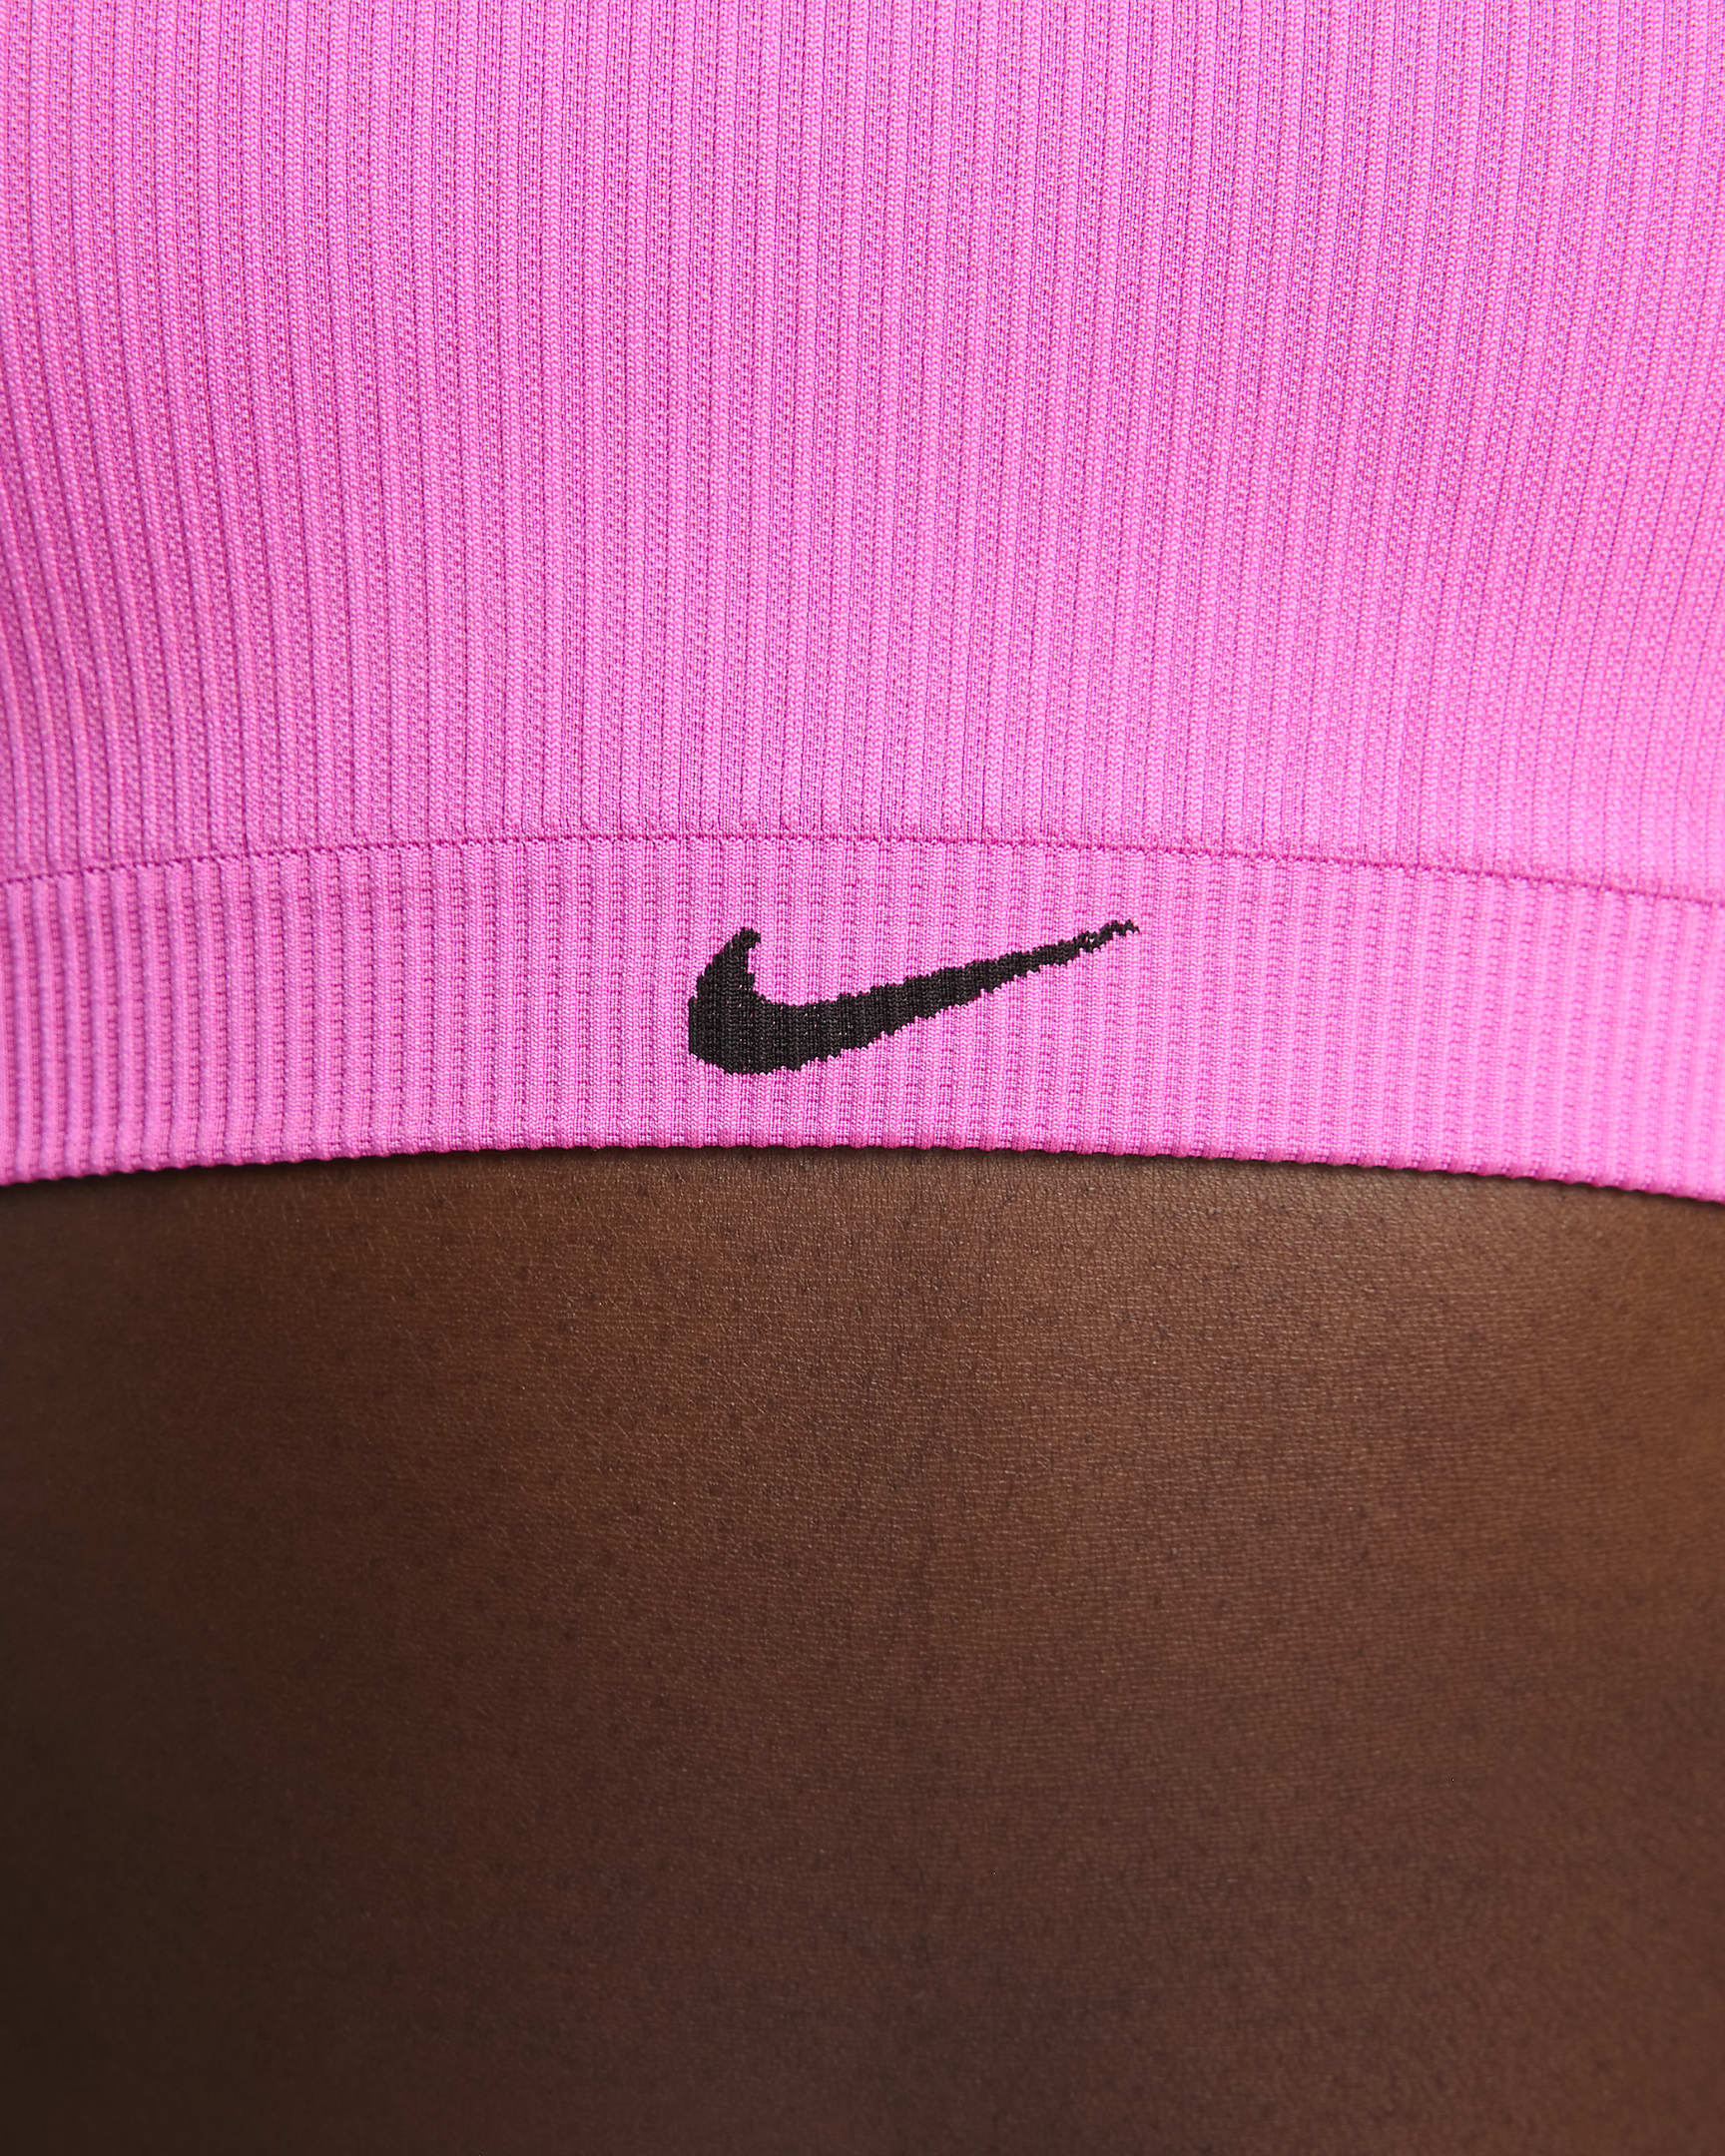 Nike Indy Seamless Ribbed Women's Light-Support Non-Padded Sports Bra ...